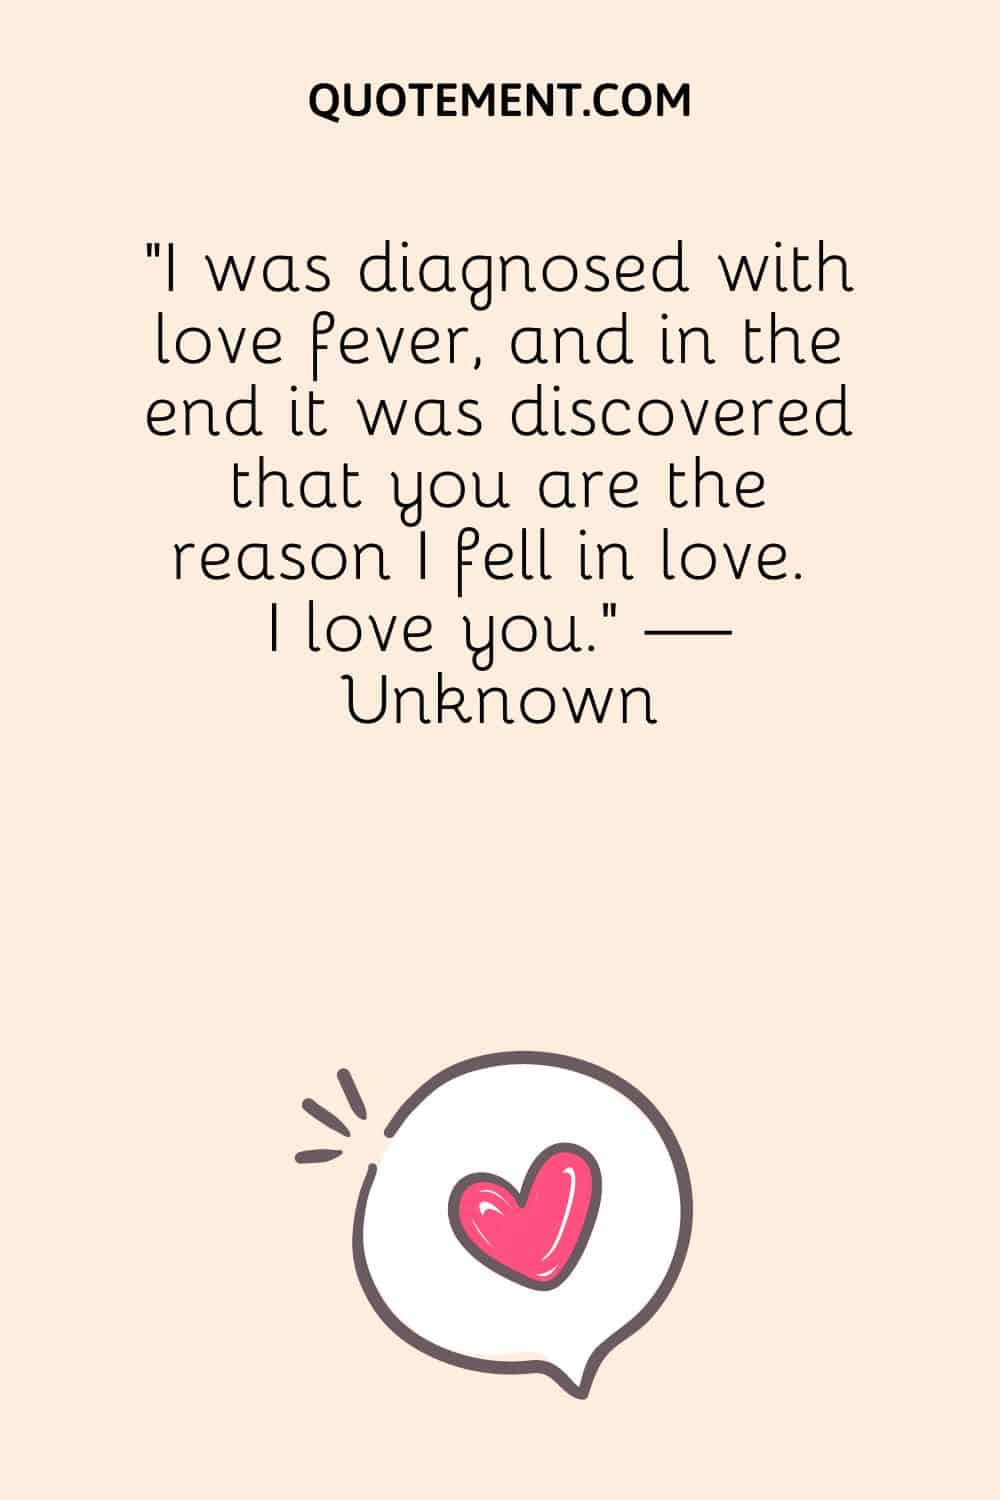 I was diagnosed with love fever, and in the end it was discovered that you are the reason I fell in love